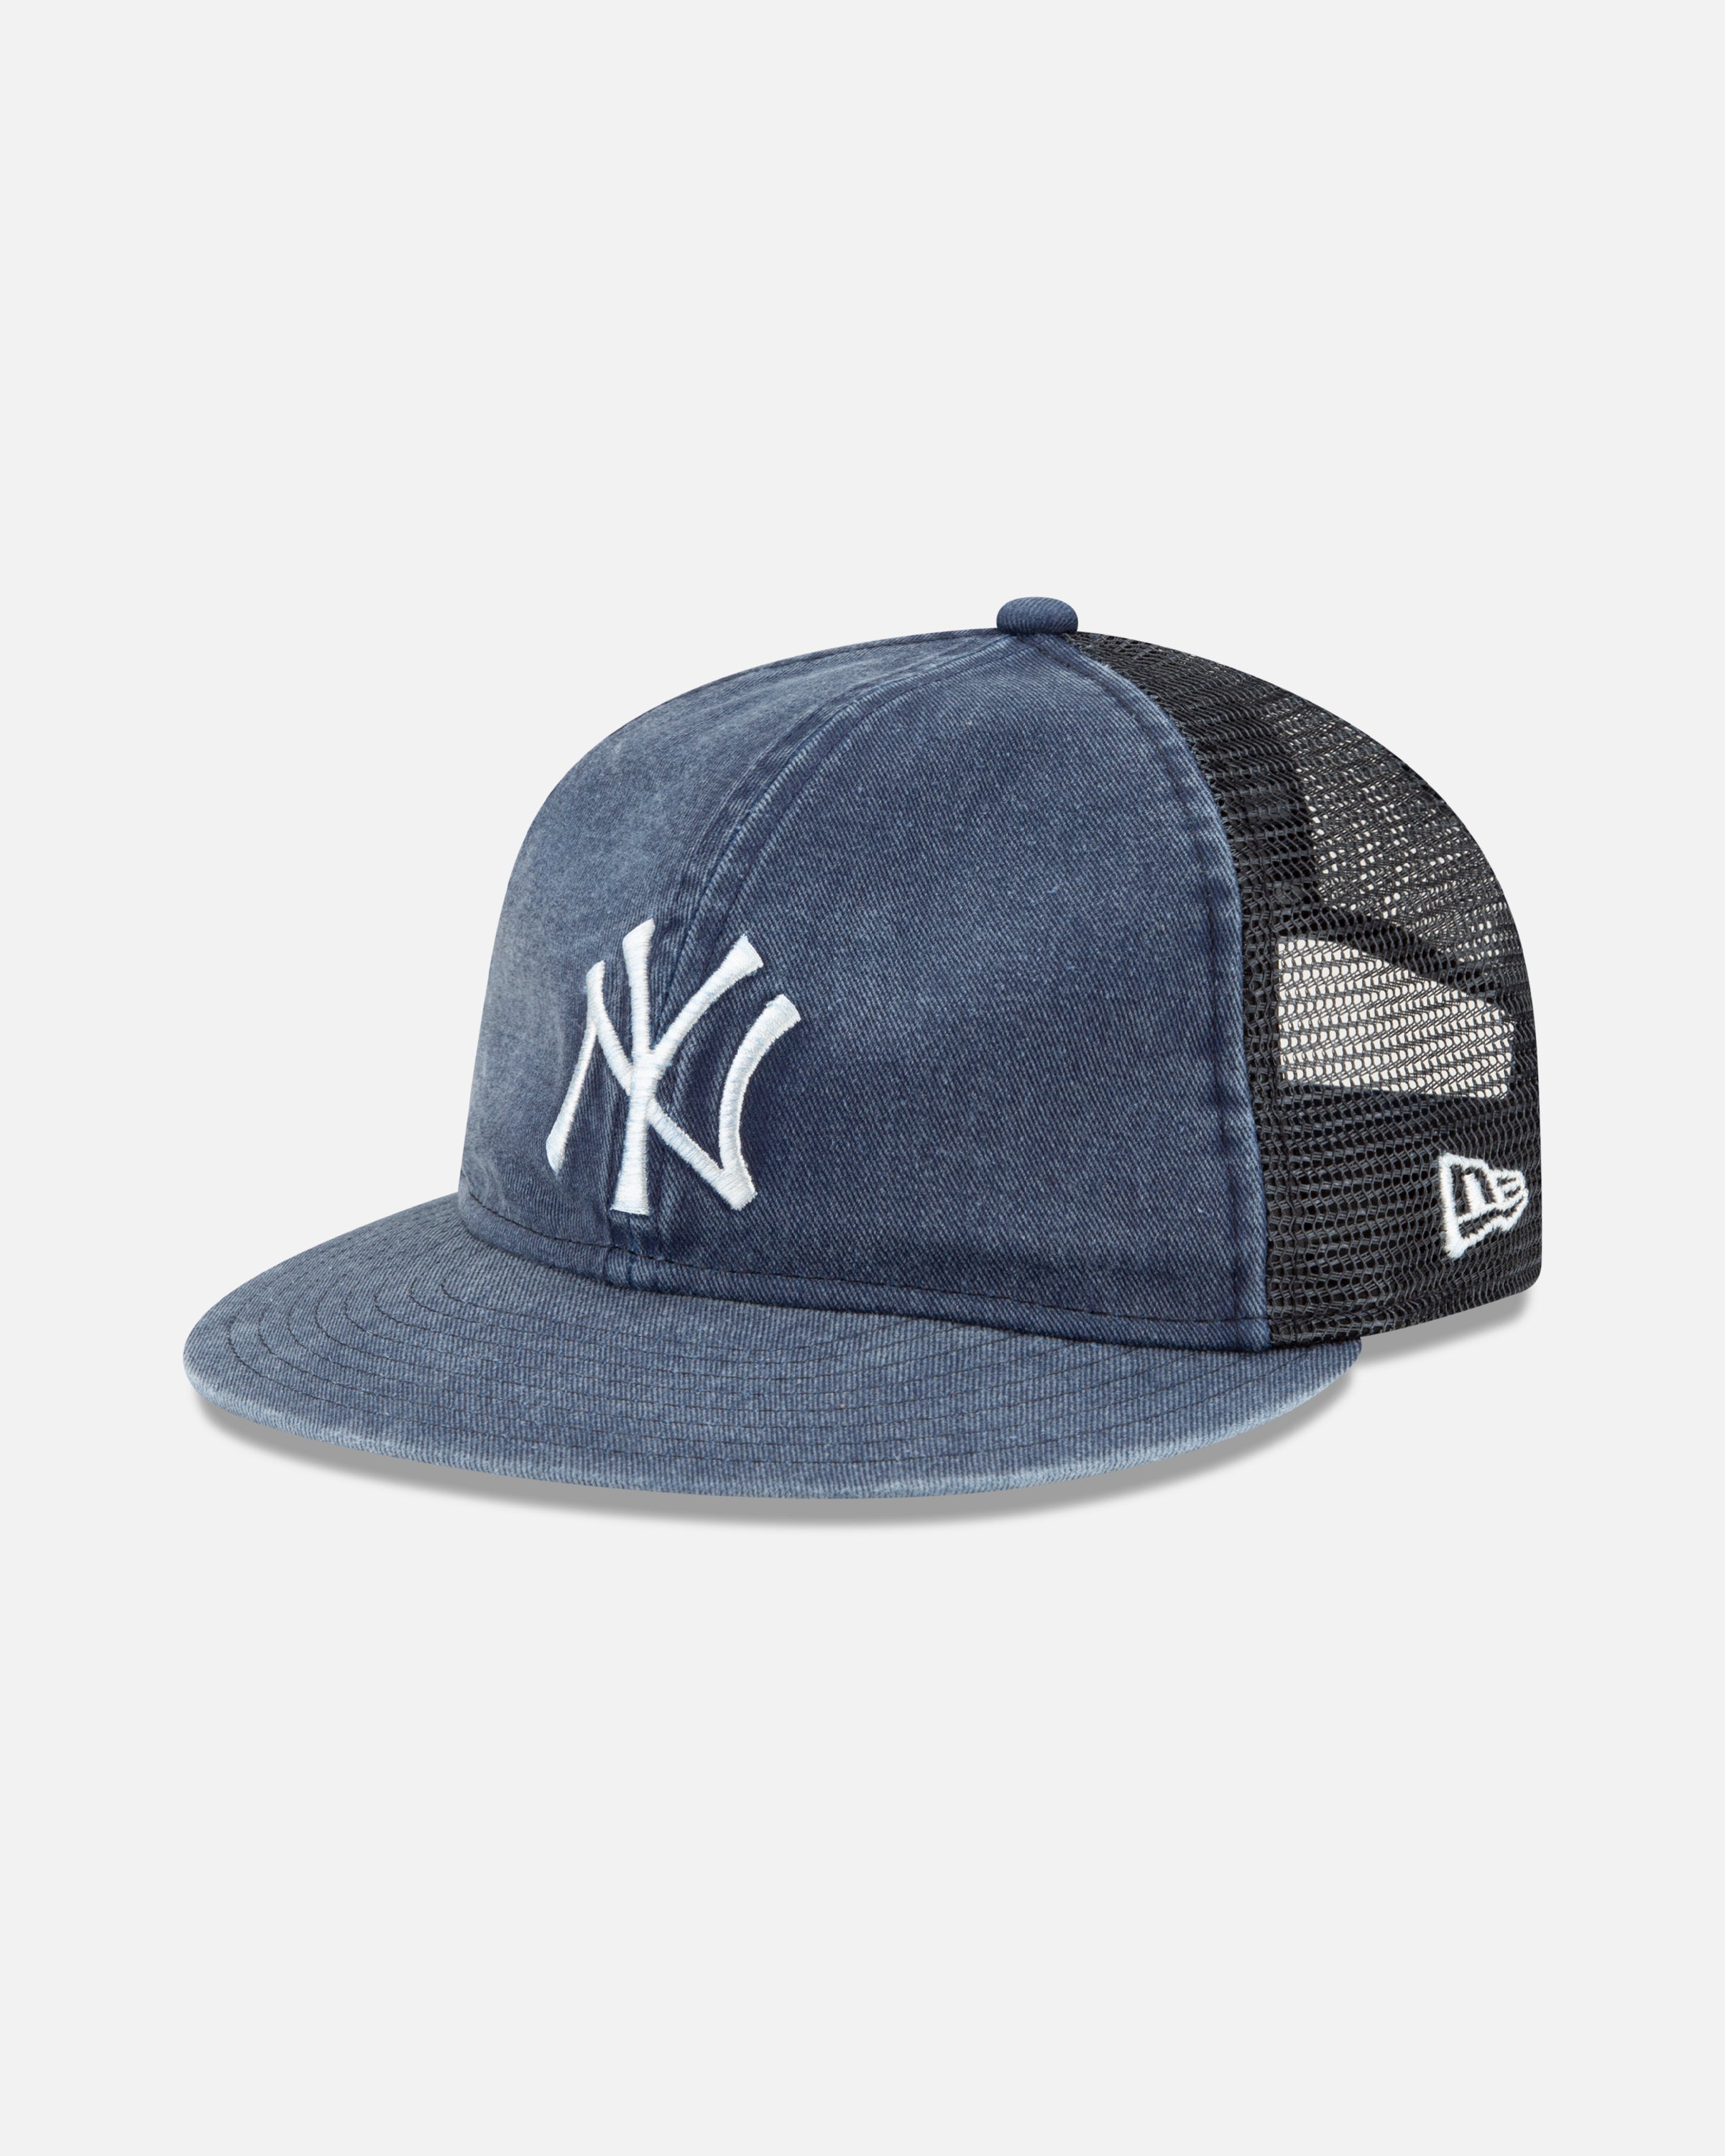 Modern Notoriety on X: Eric Emanuel is dropping a new collection with  @NewEraCap and @MLB ⚾️   / X